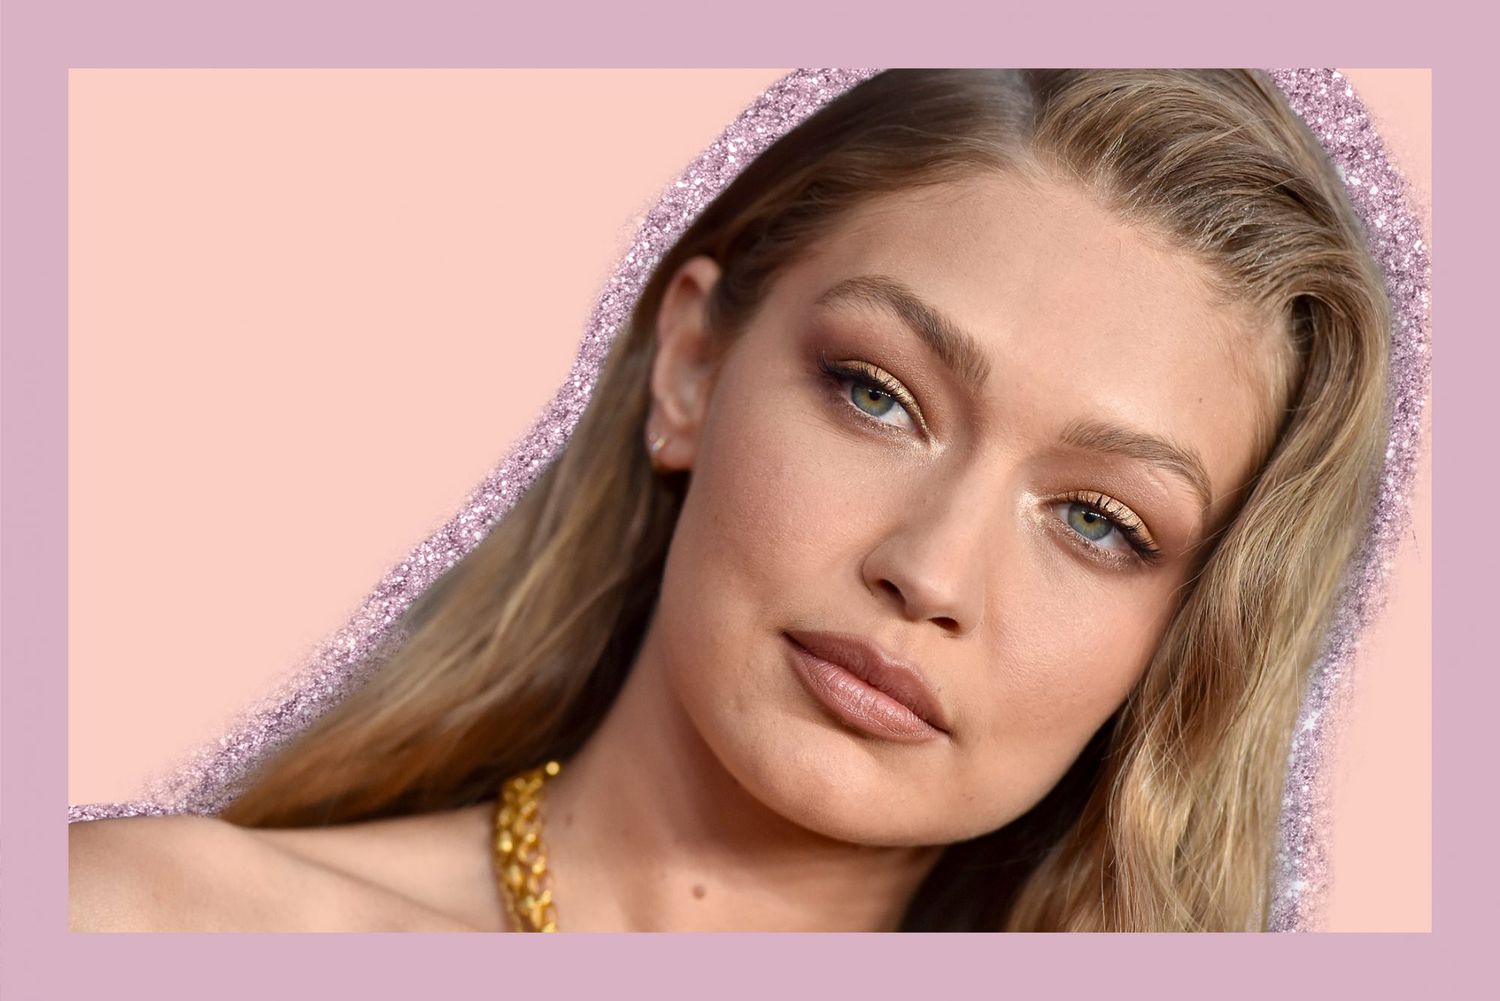 Gigi Hadid pregnancy skin care , NEWARK, NEW JERSEY - AUGUST 26: Gigi Hadid attends the 2019 MTV Video Music Awards at Prudential Center on August 26, 2019 in Newark, New Jersey. (Photo by Axelle/Bauer-Griffin/WireImage)